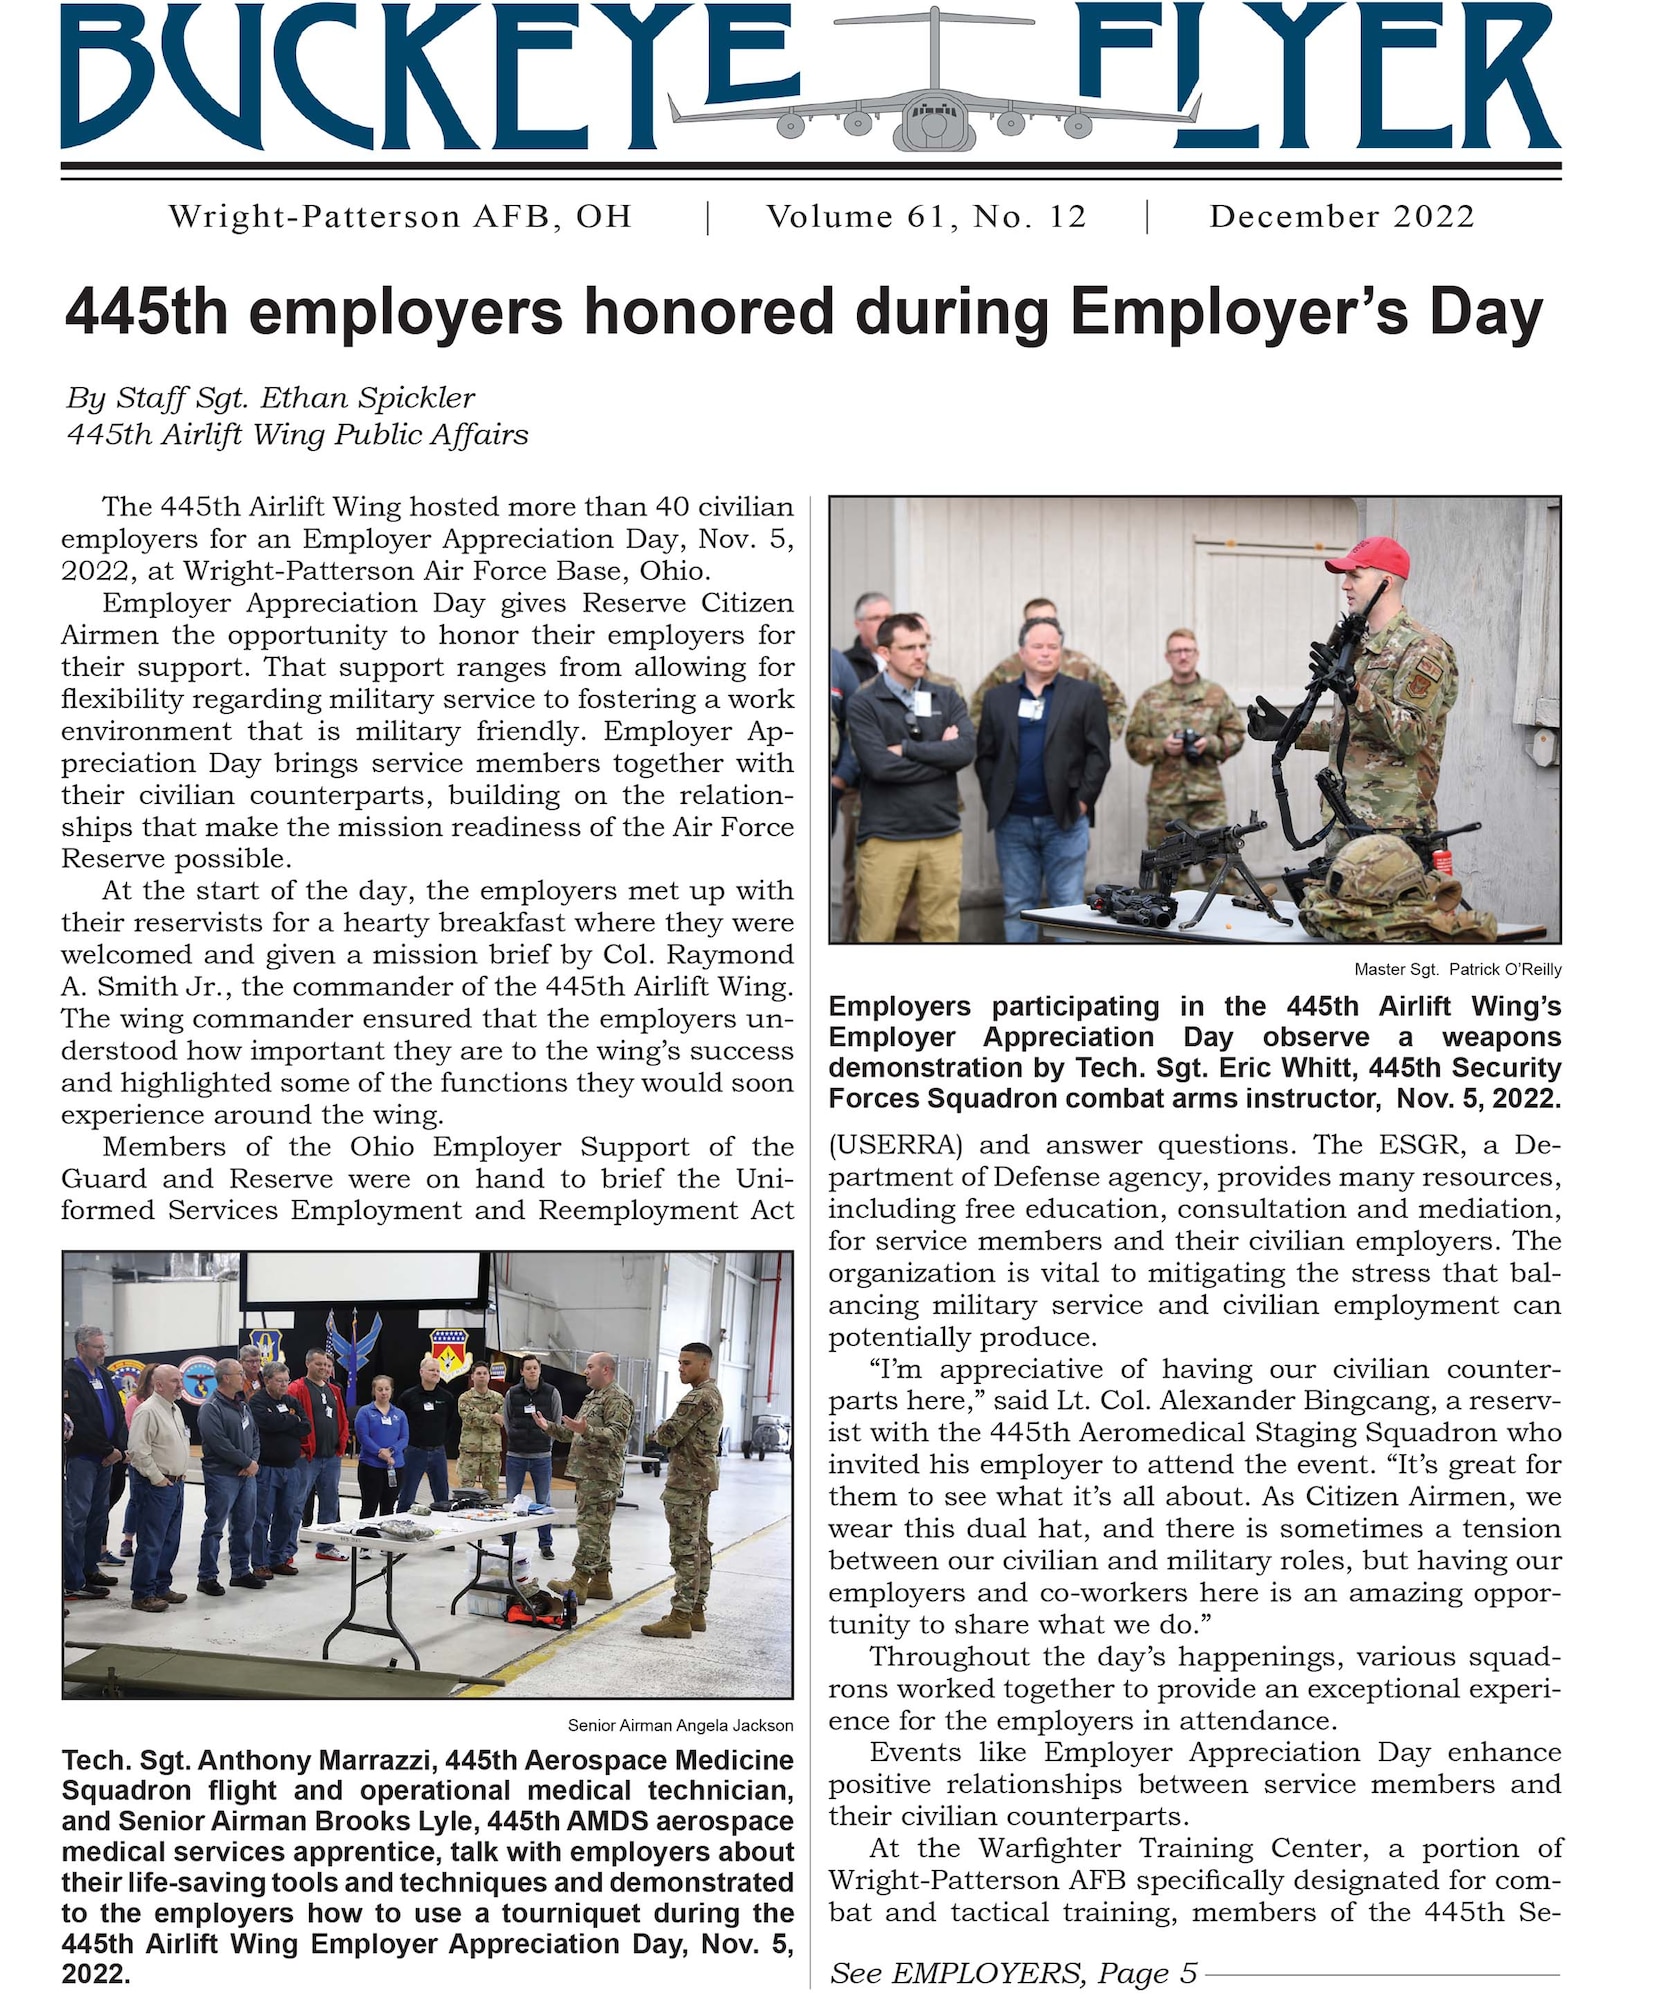 The December 2022 issue of the Buckeye Flyer is now available. The official publication of the 445th Airlift Wing includes eight pages of stories, photos and features pertaining to the 445th Airlift Wing, Air Force Reserve Command and the U.S. Air Force.